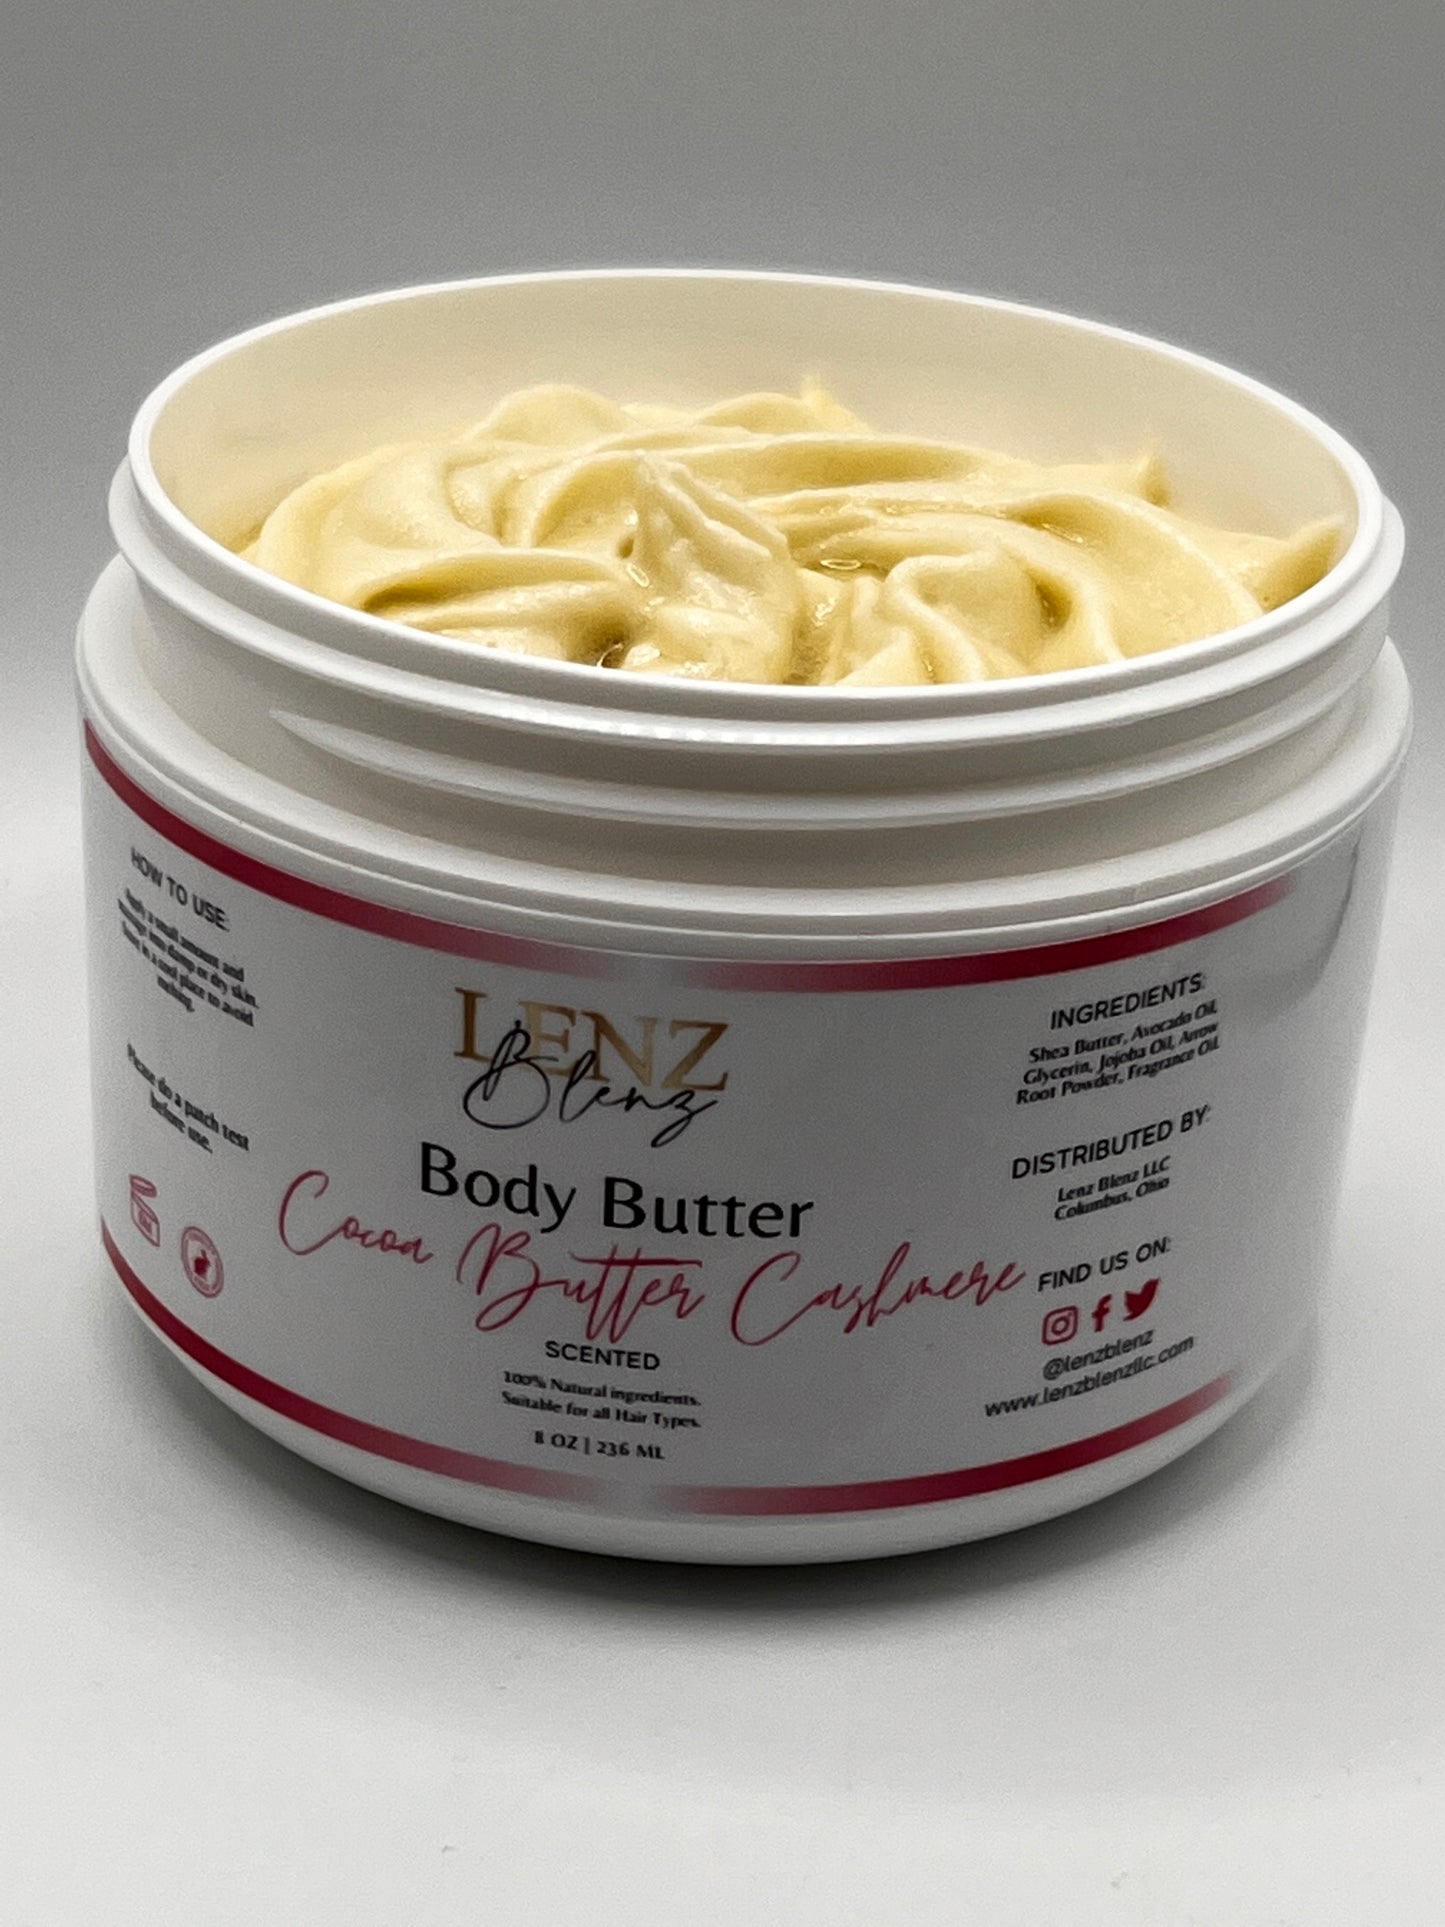 Cocoa Butter Cashmere Body Butter